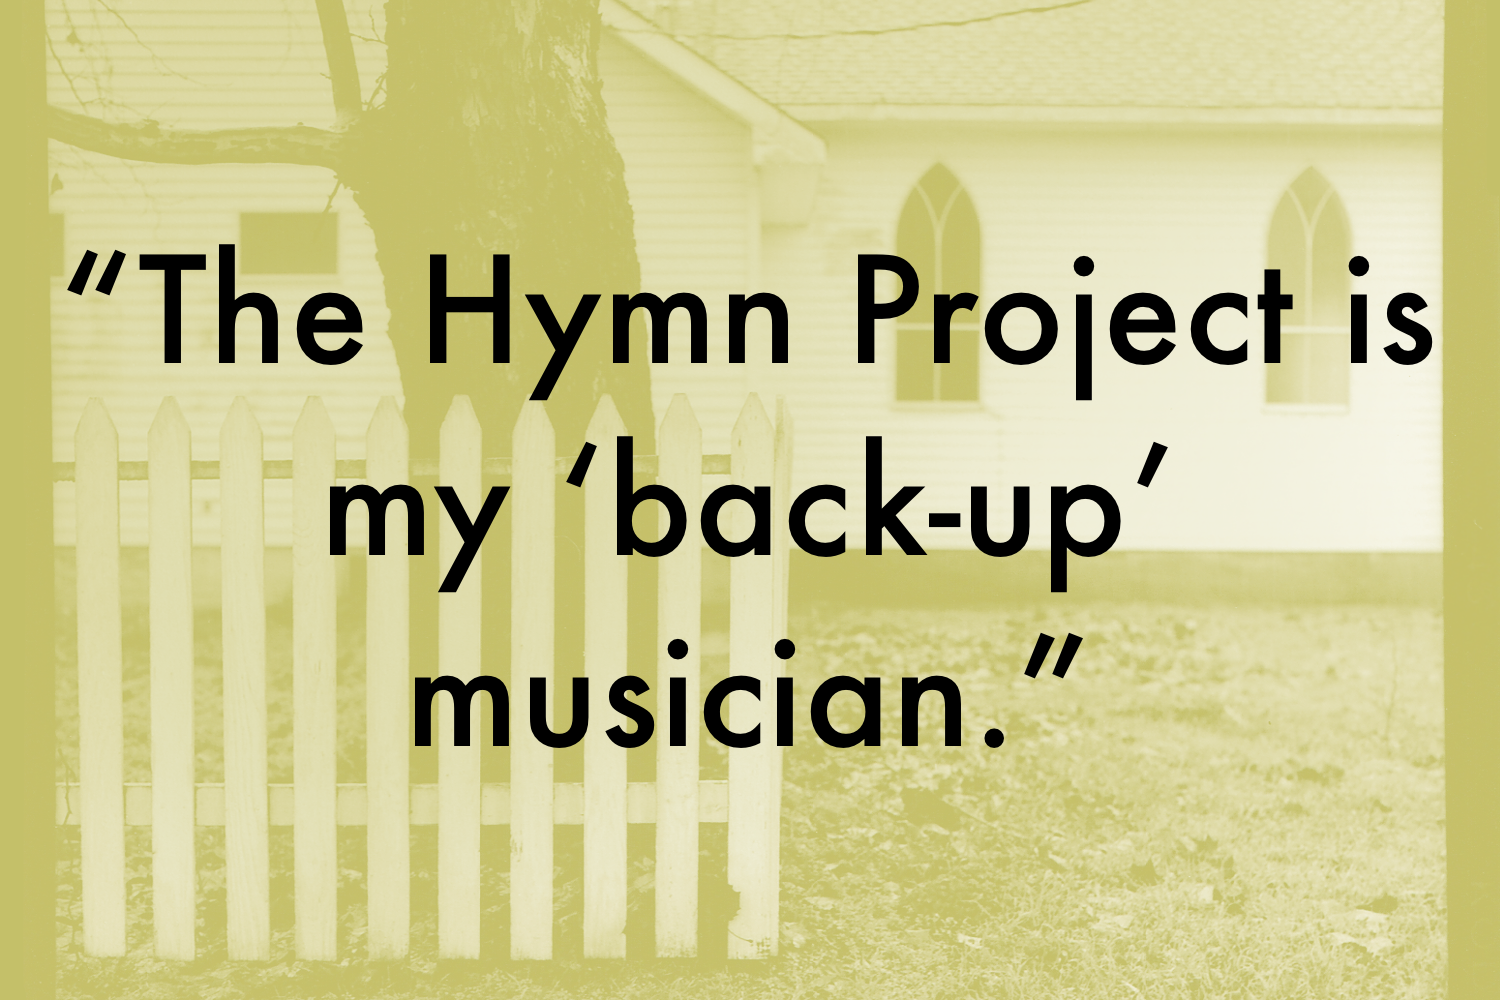 The Hymn Project is my back up musician. Piano hymns on CD